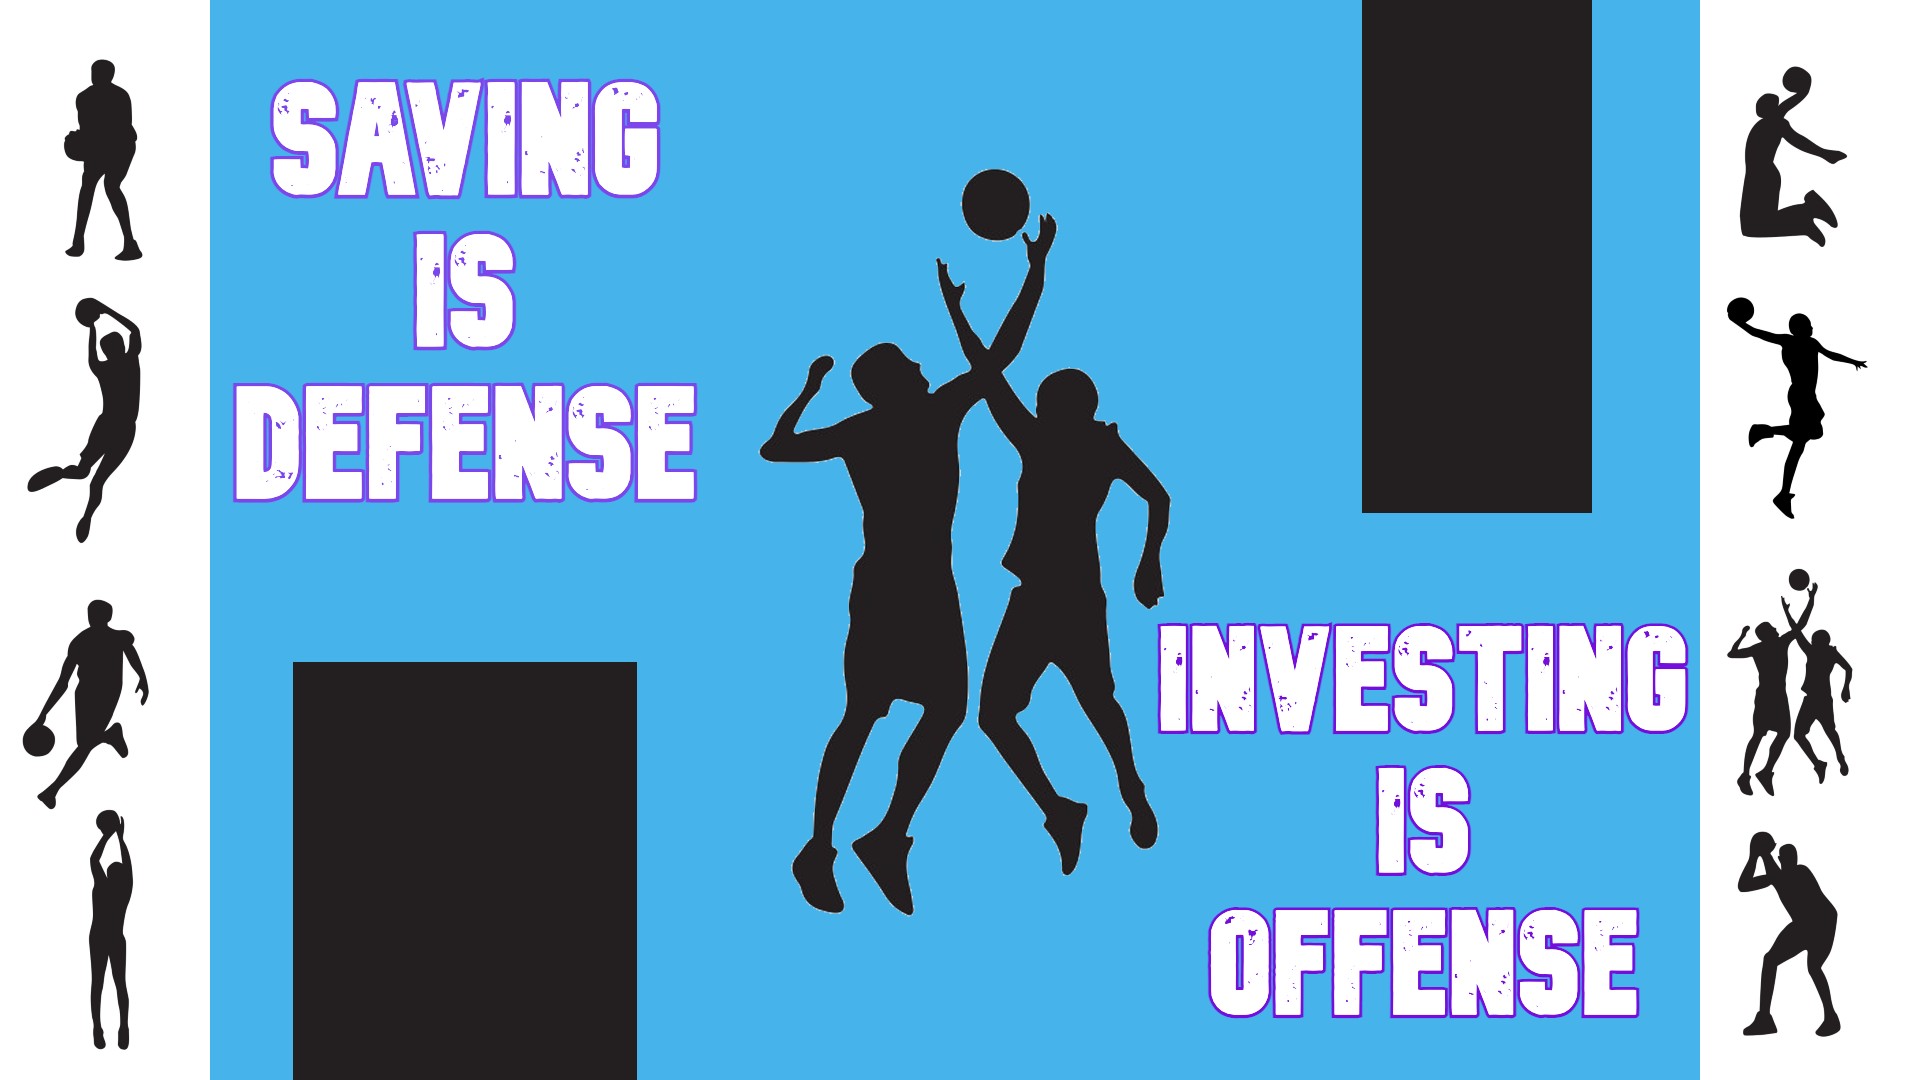 Saving is Defense Investing is Offense